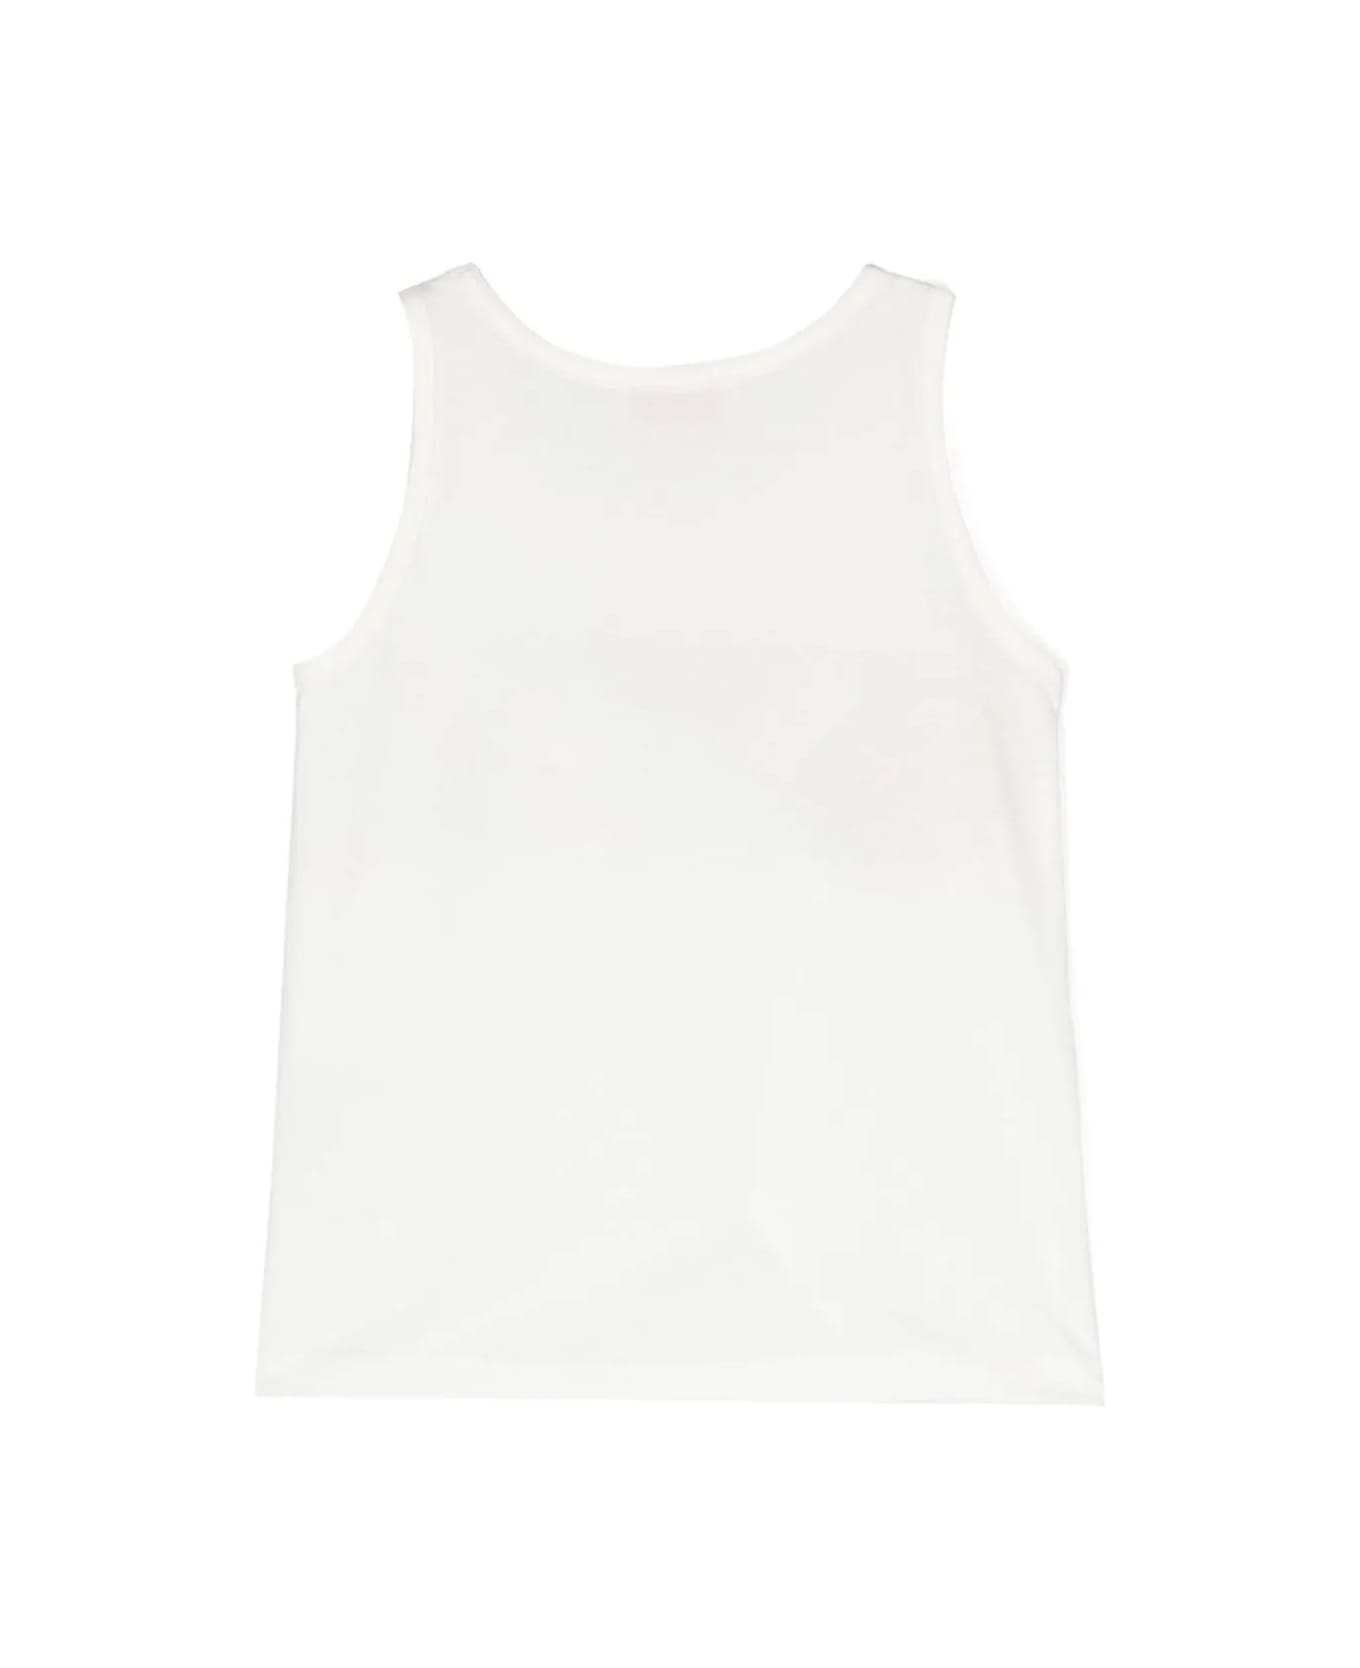 Pucci White Tank Top With Pucci Print On Iride Band - White